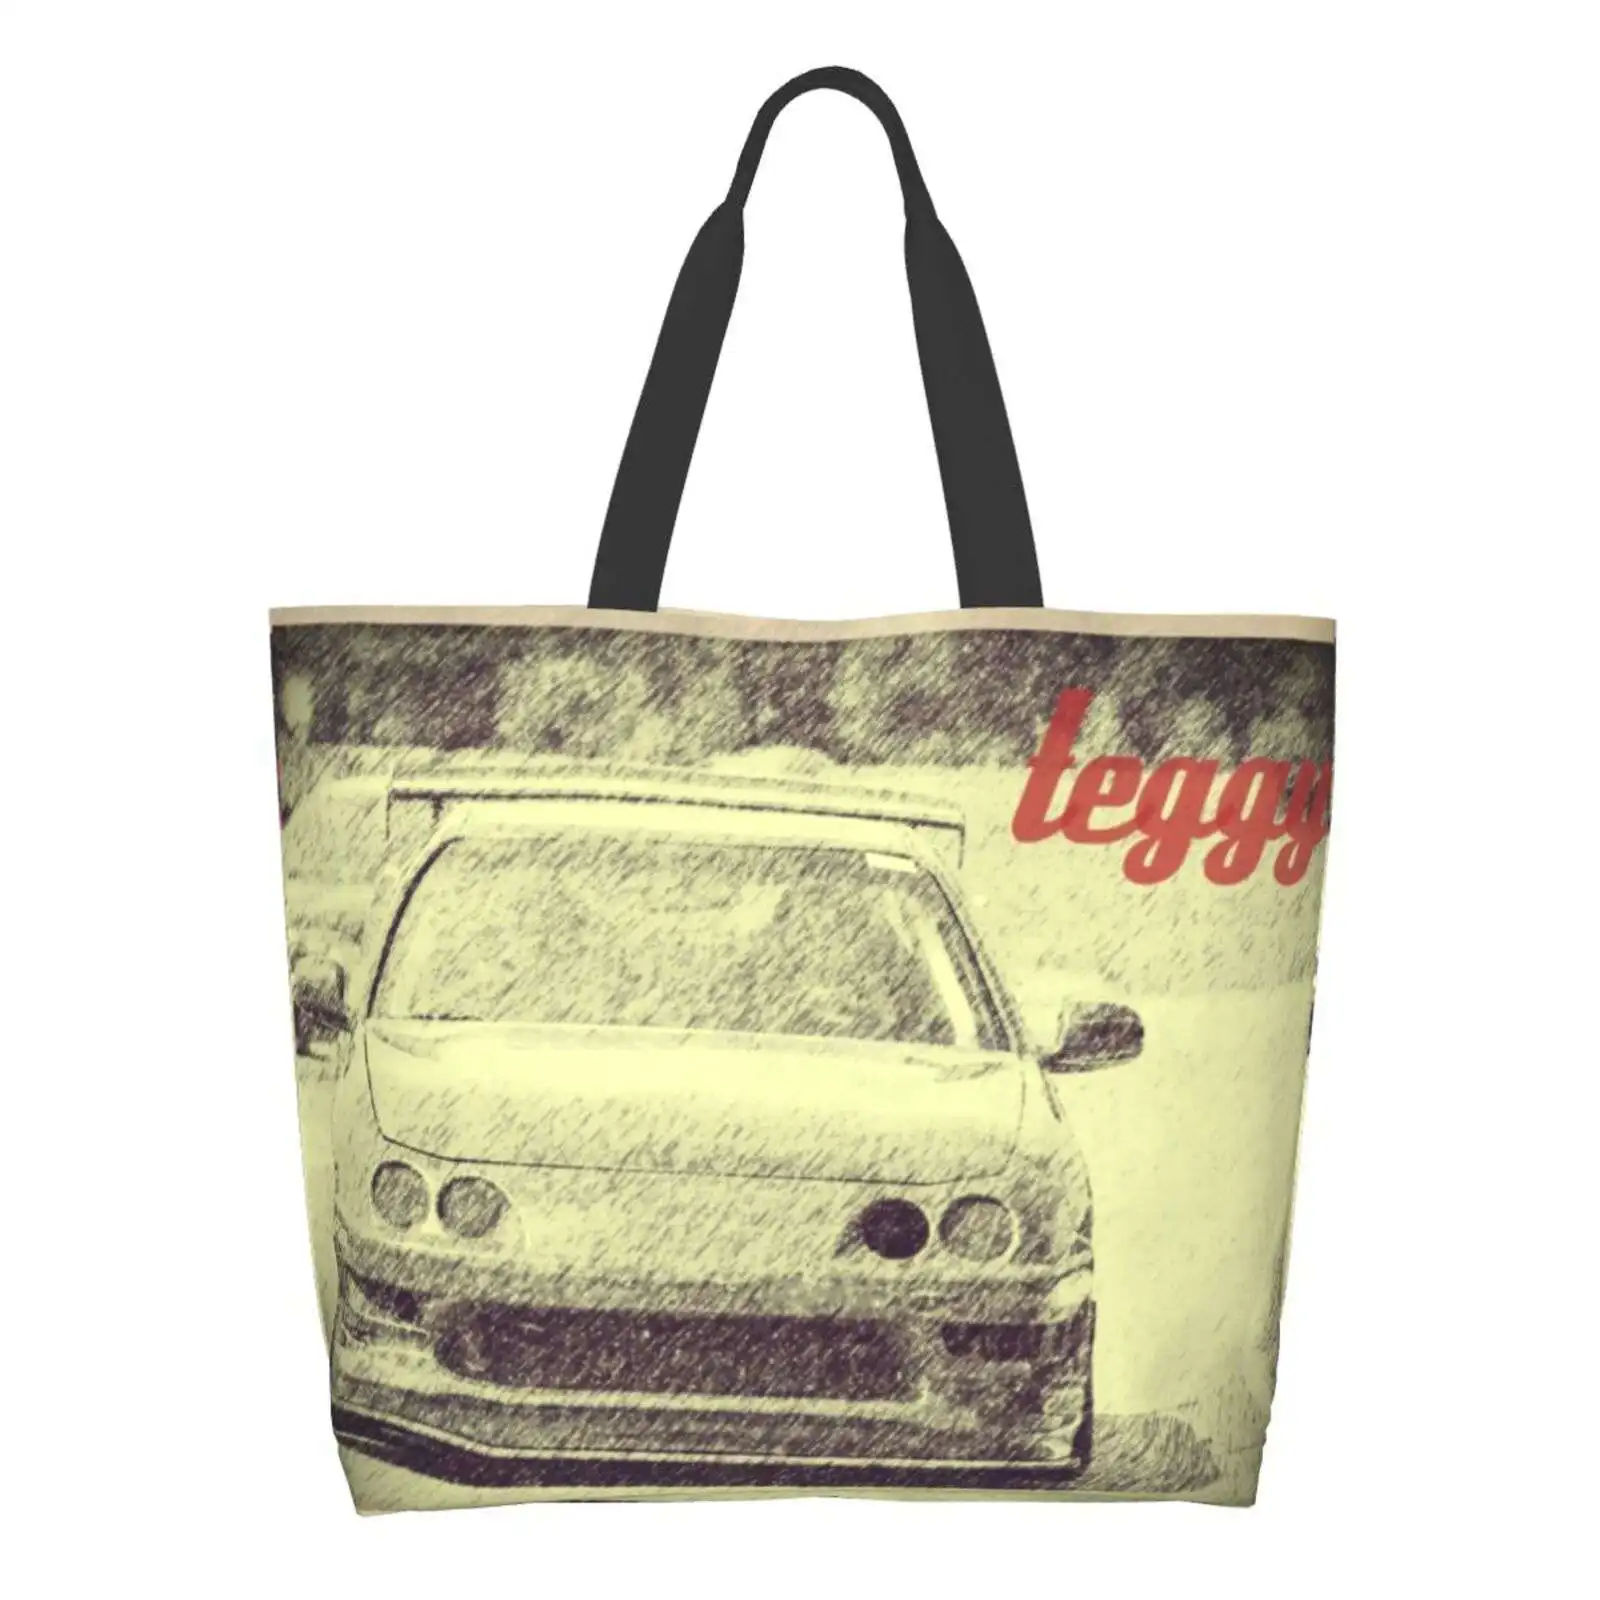 

Teggy Passion Large Size Reusable Foldable Shopping Bag Tuner Civic Integra Crx Jdm Stance Japan Racing Tuning Cars Typer